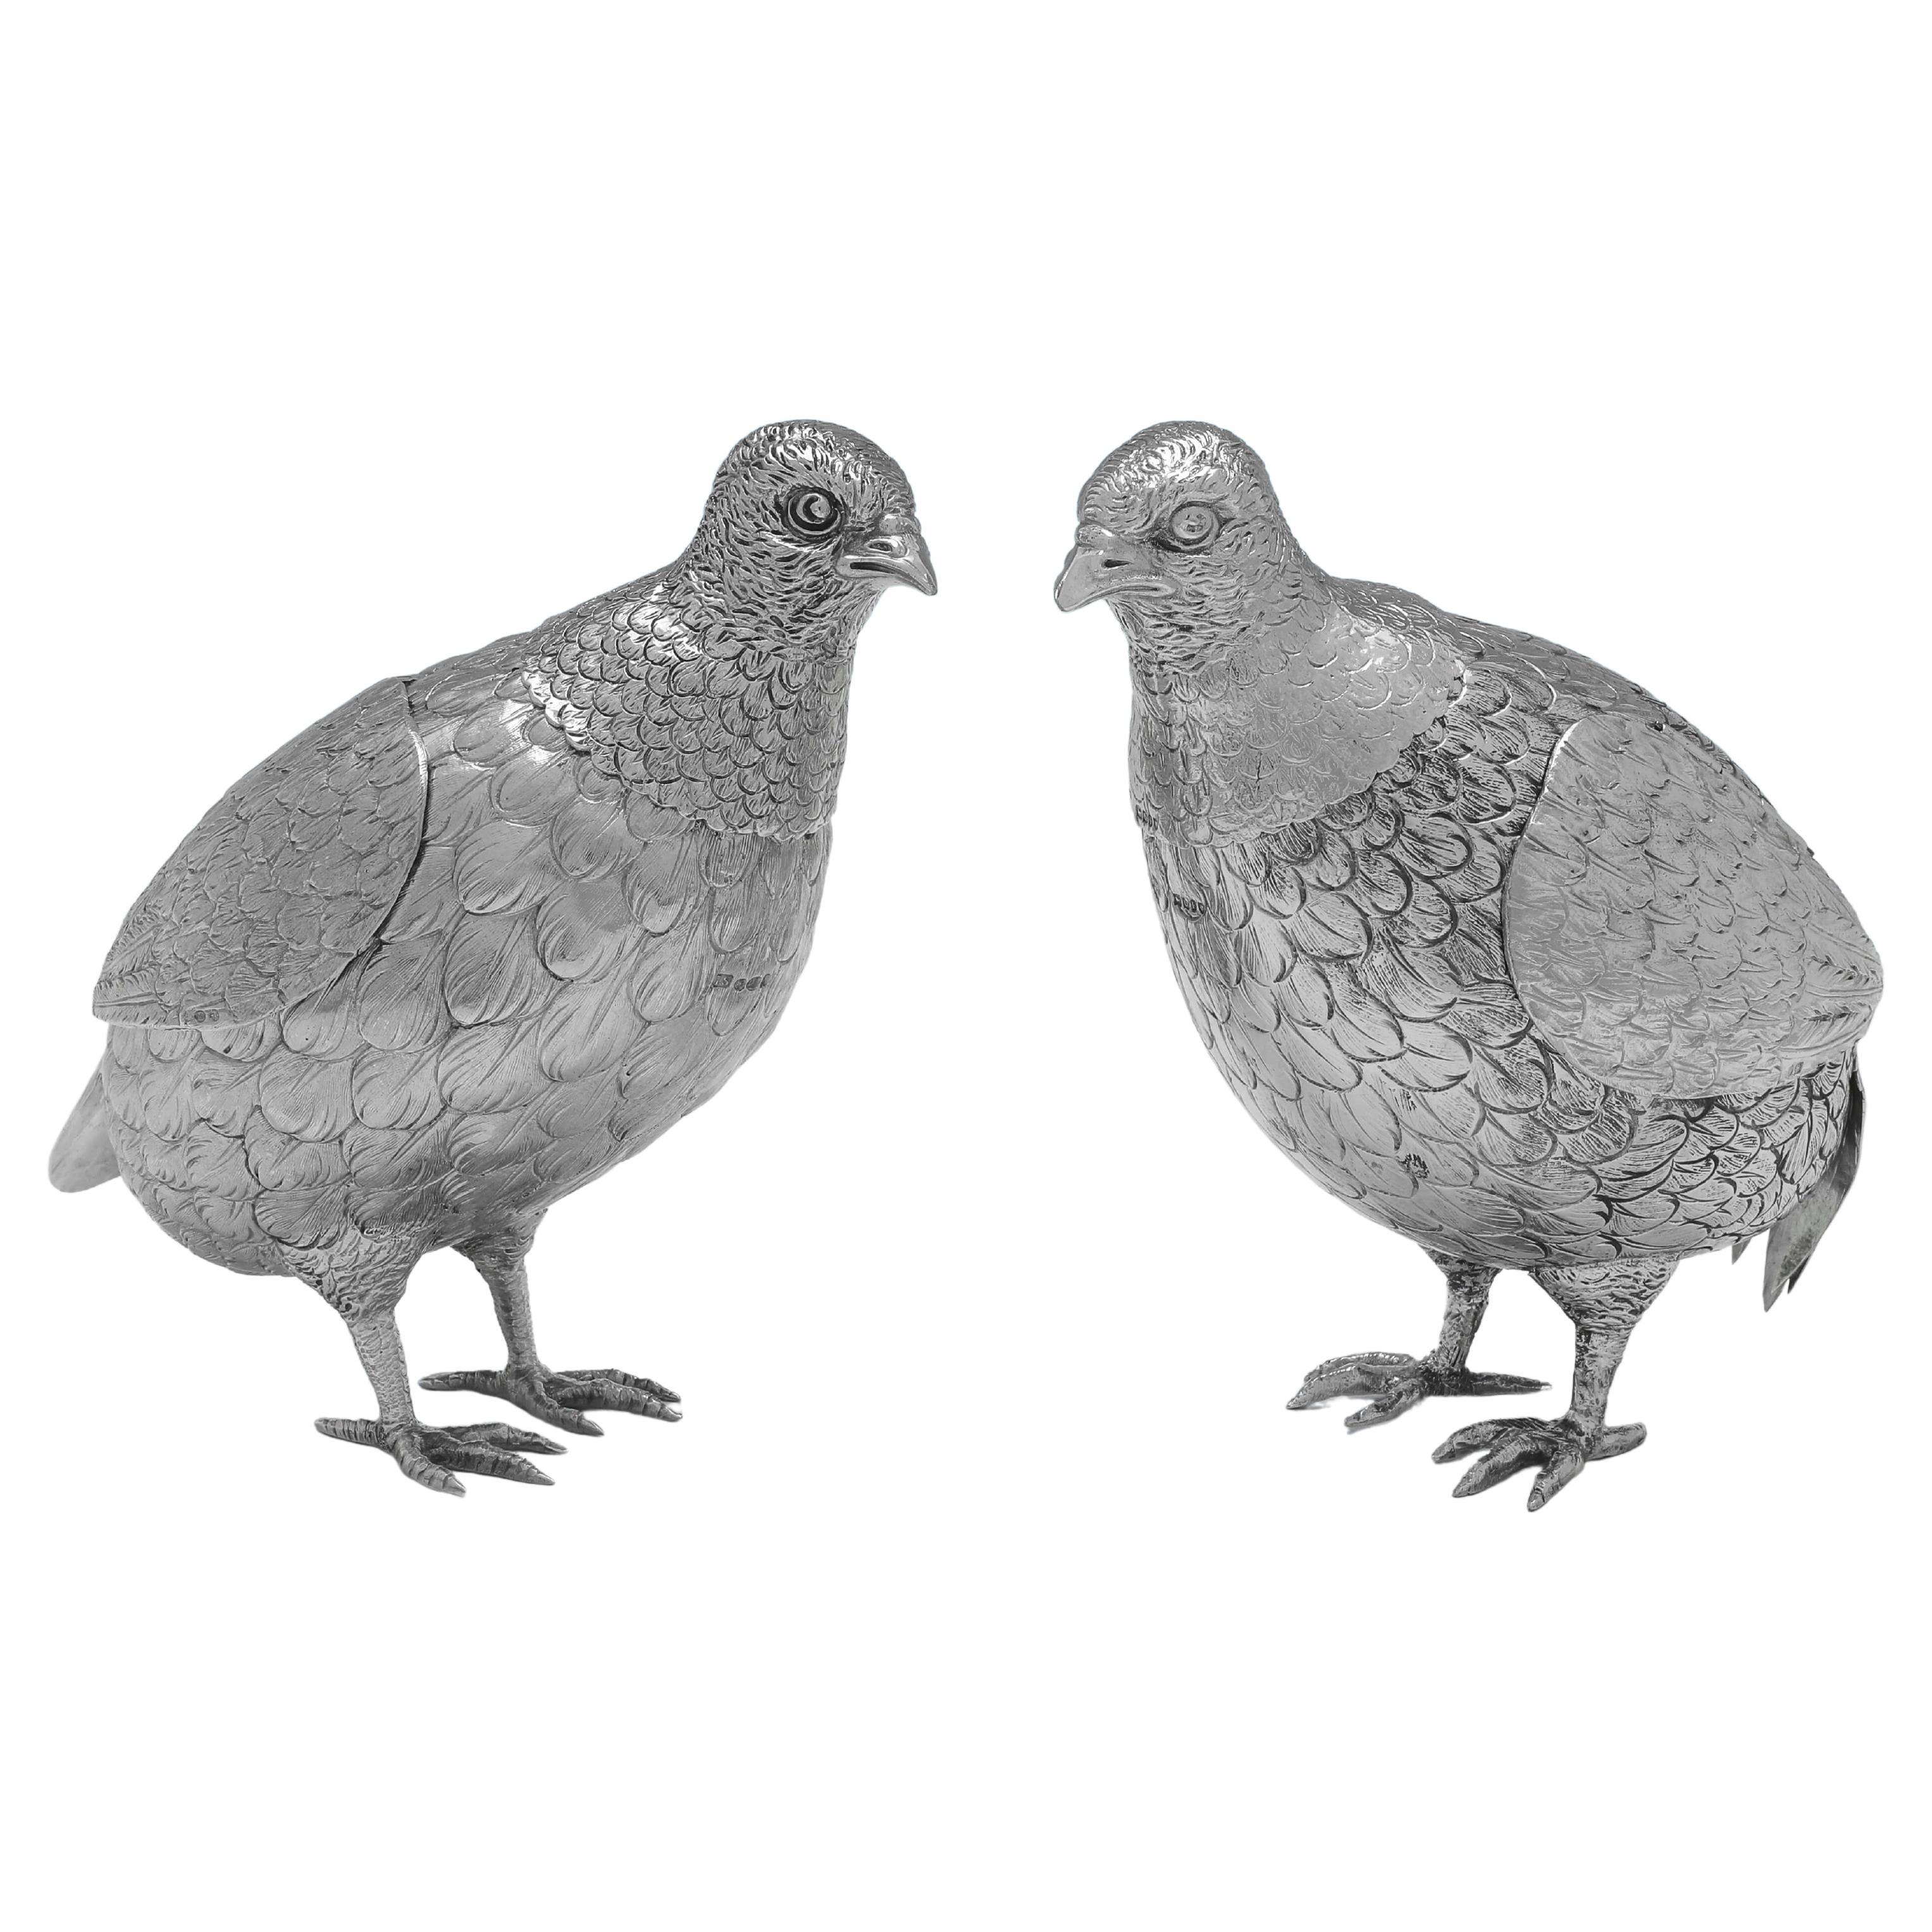 Matched Pair of Antique Sterling Silver Models of Partridges, 1897 & 1925 For Sale